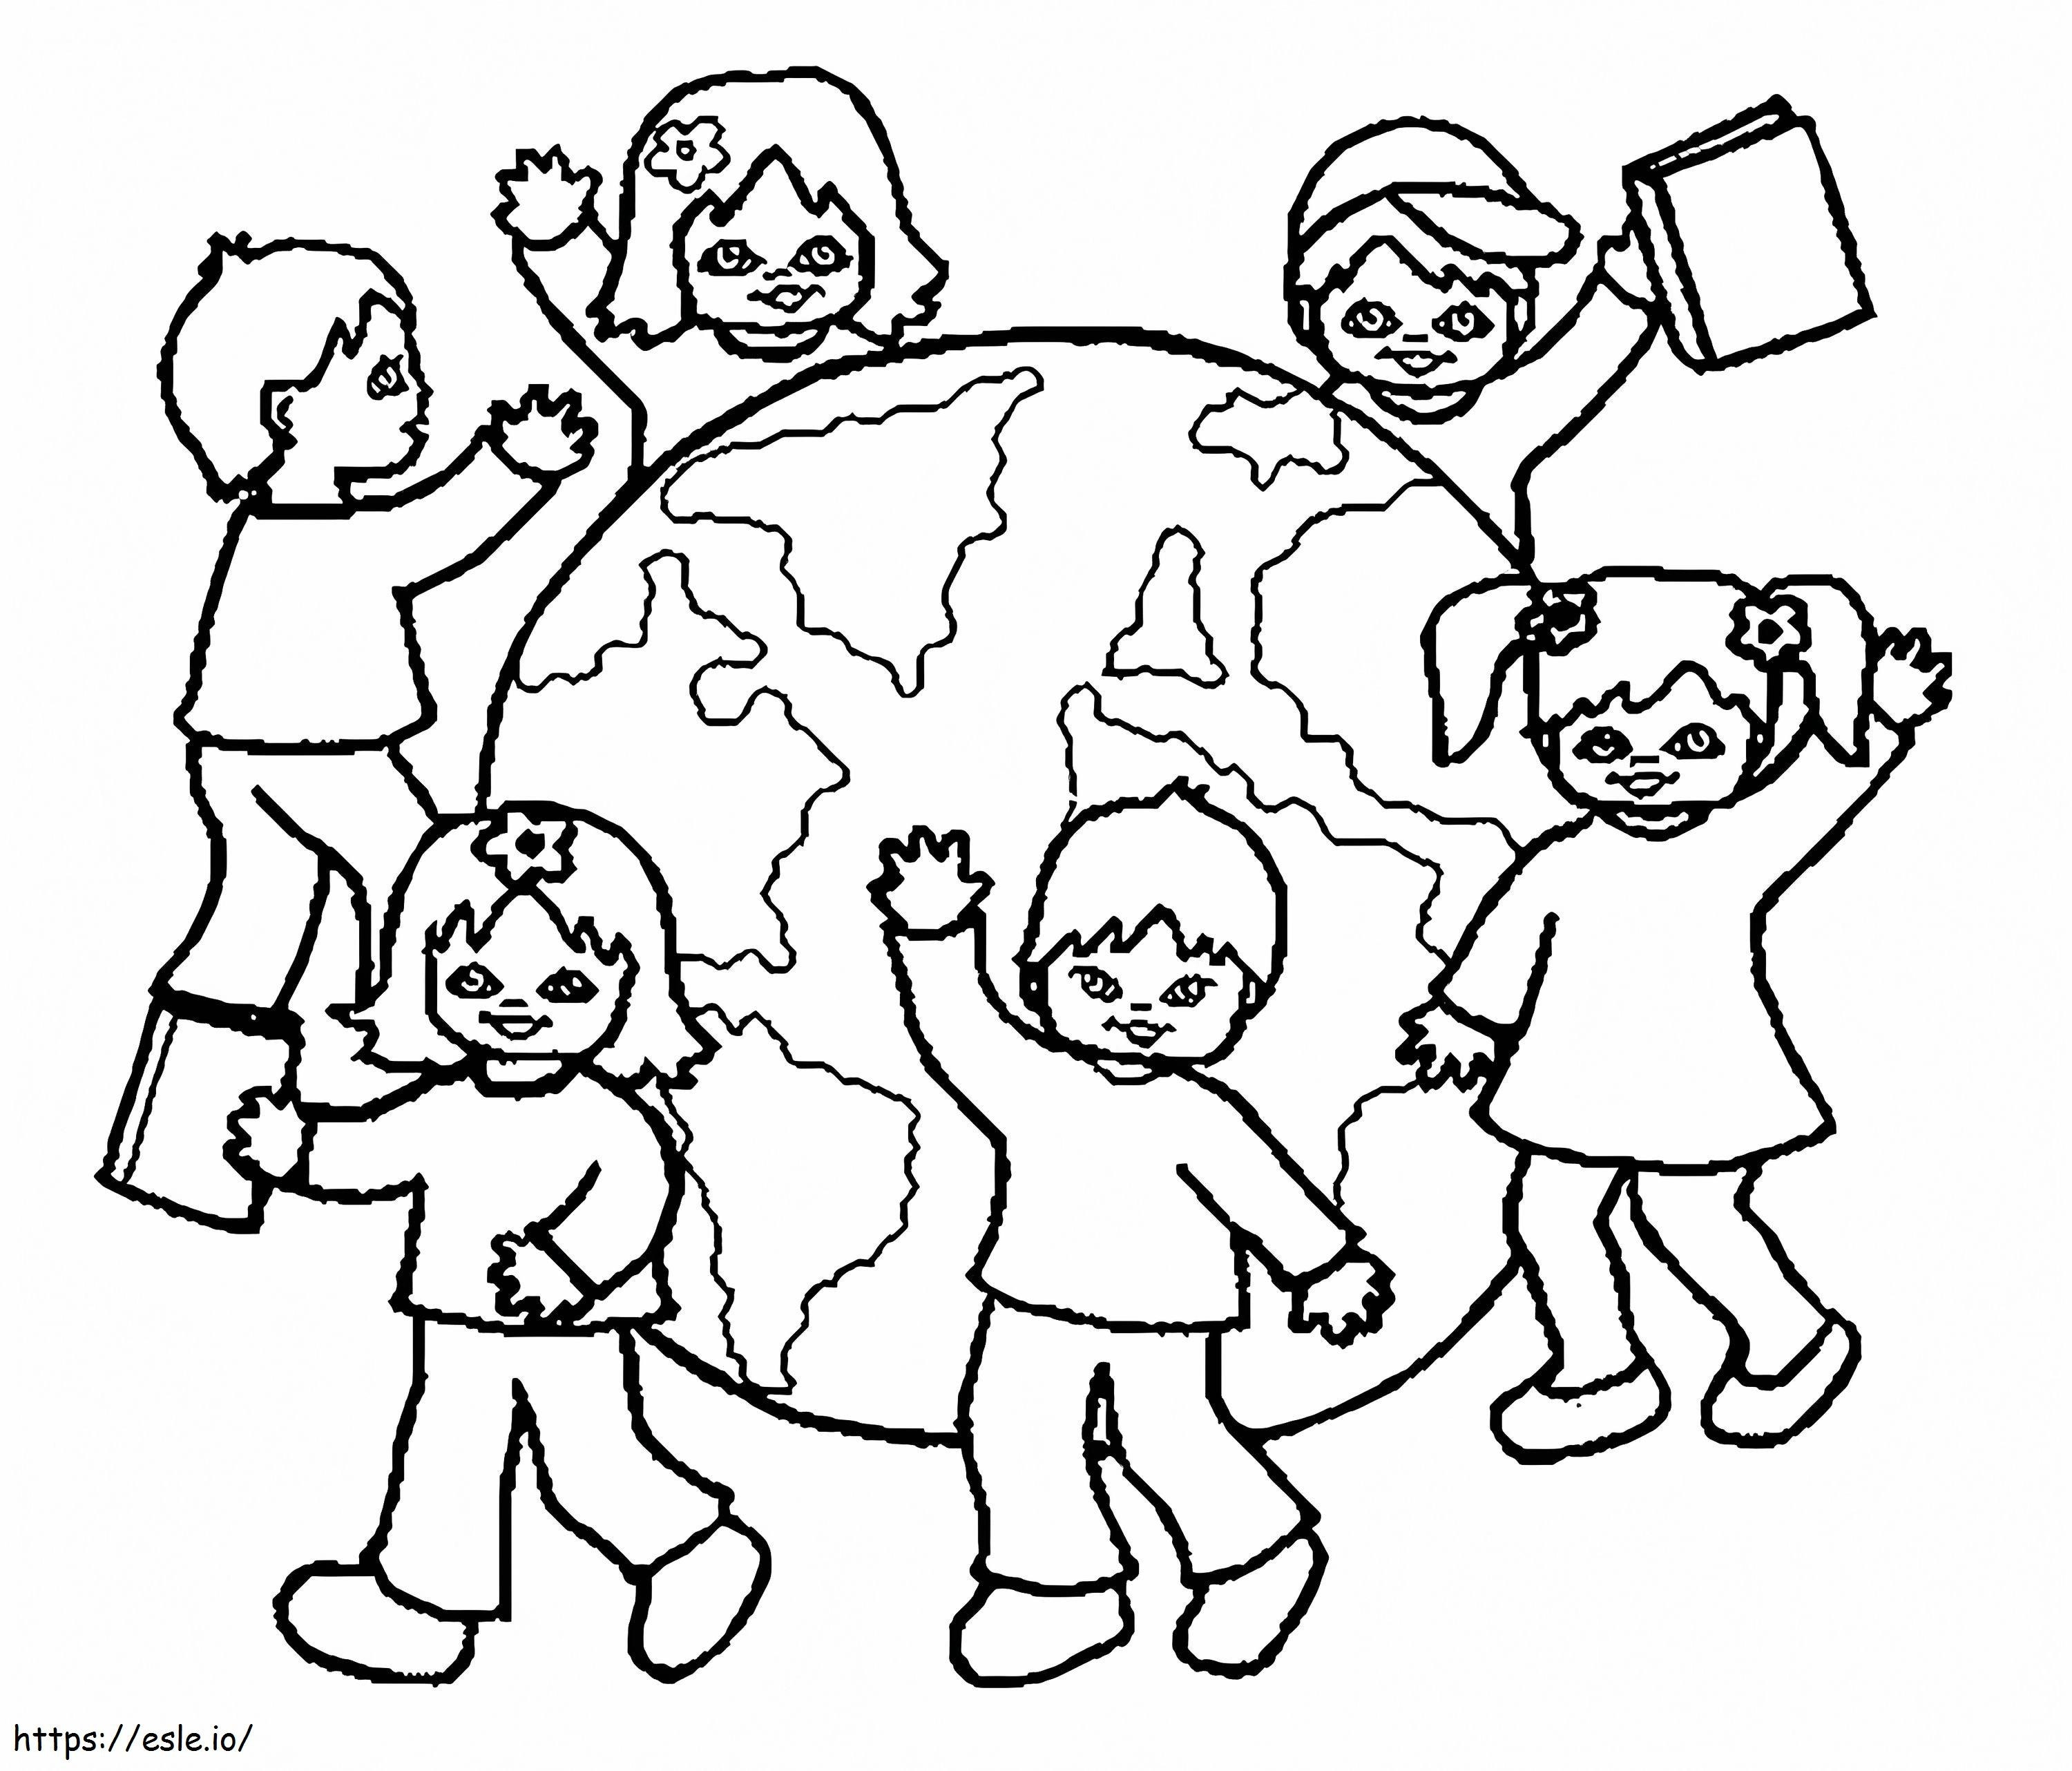 Print World Thinking Day Coloring Pafe coloring page